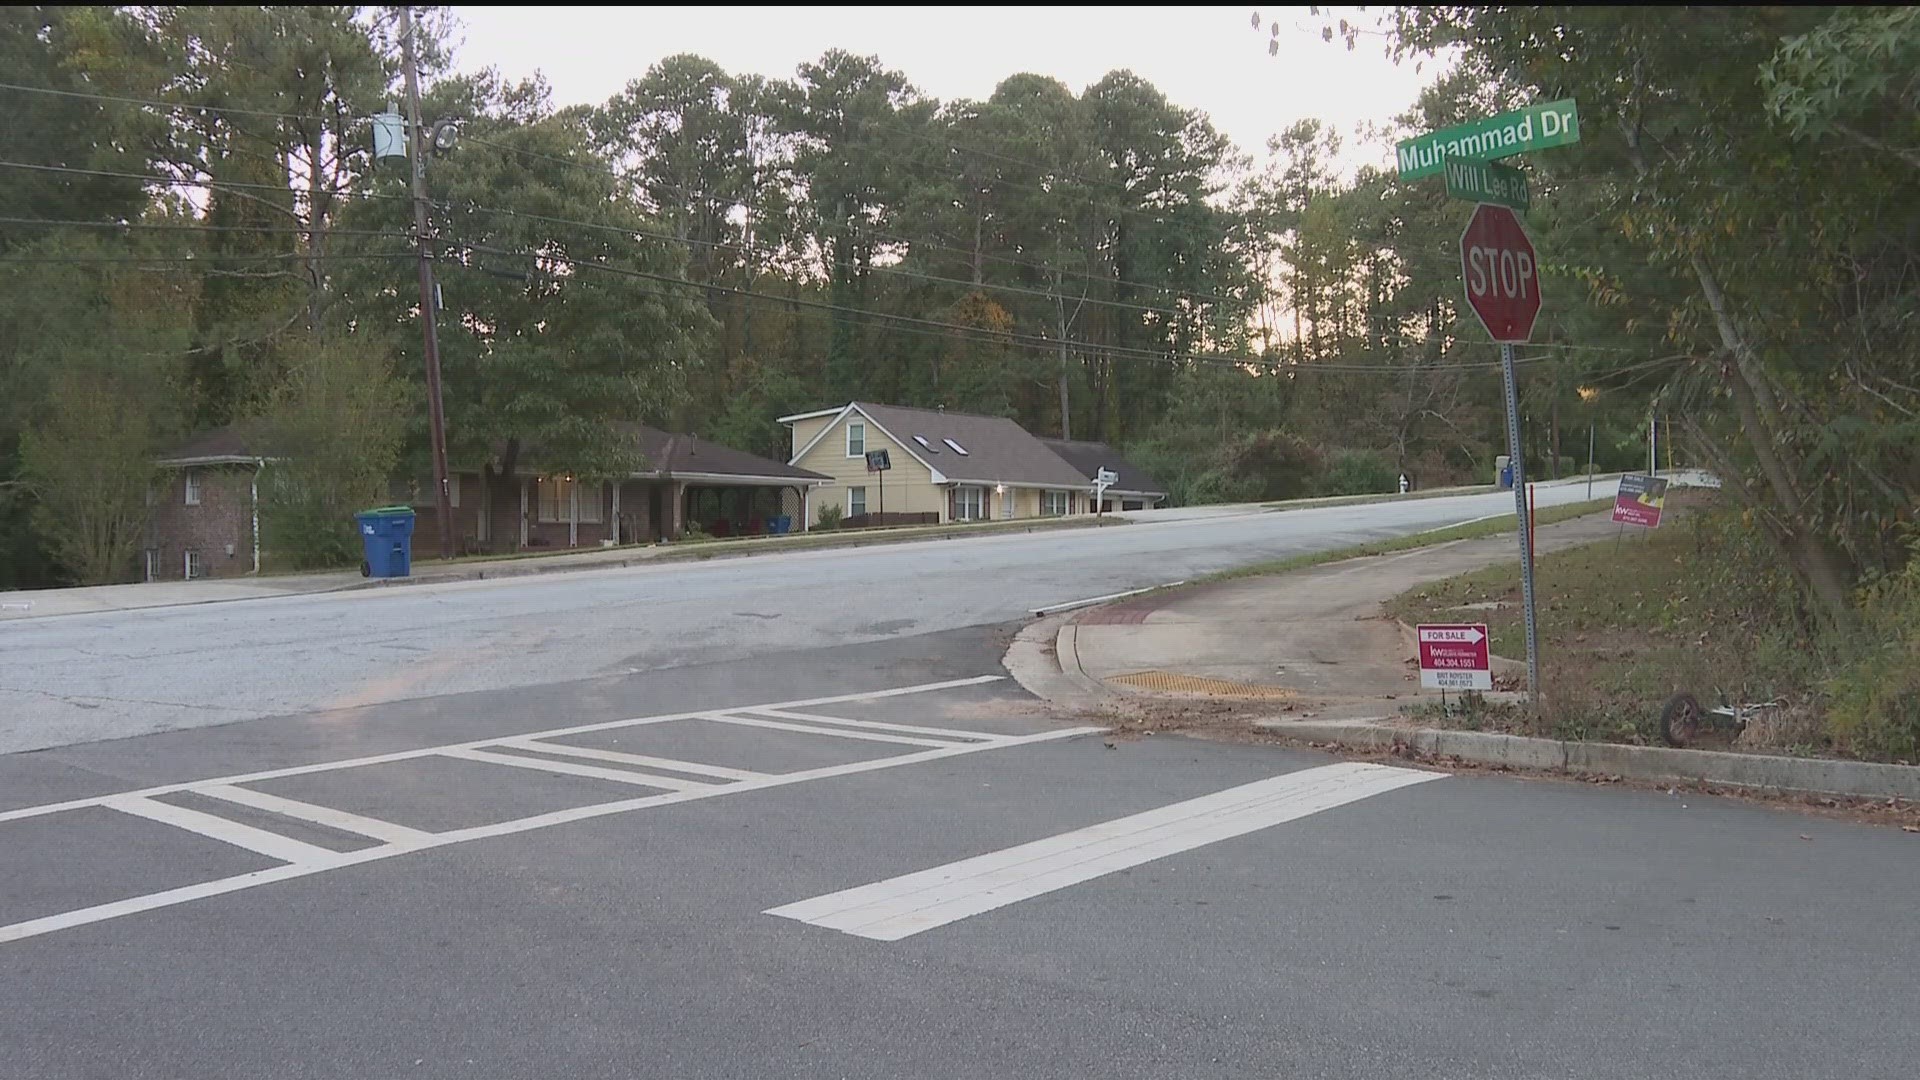 Millions of dollars to improve pedestrian safety in the City of South Fulton is on hold after the mayor said it ended up in the wrong location.